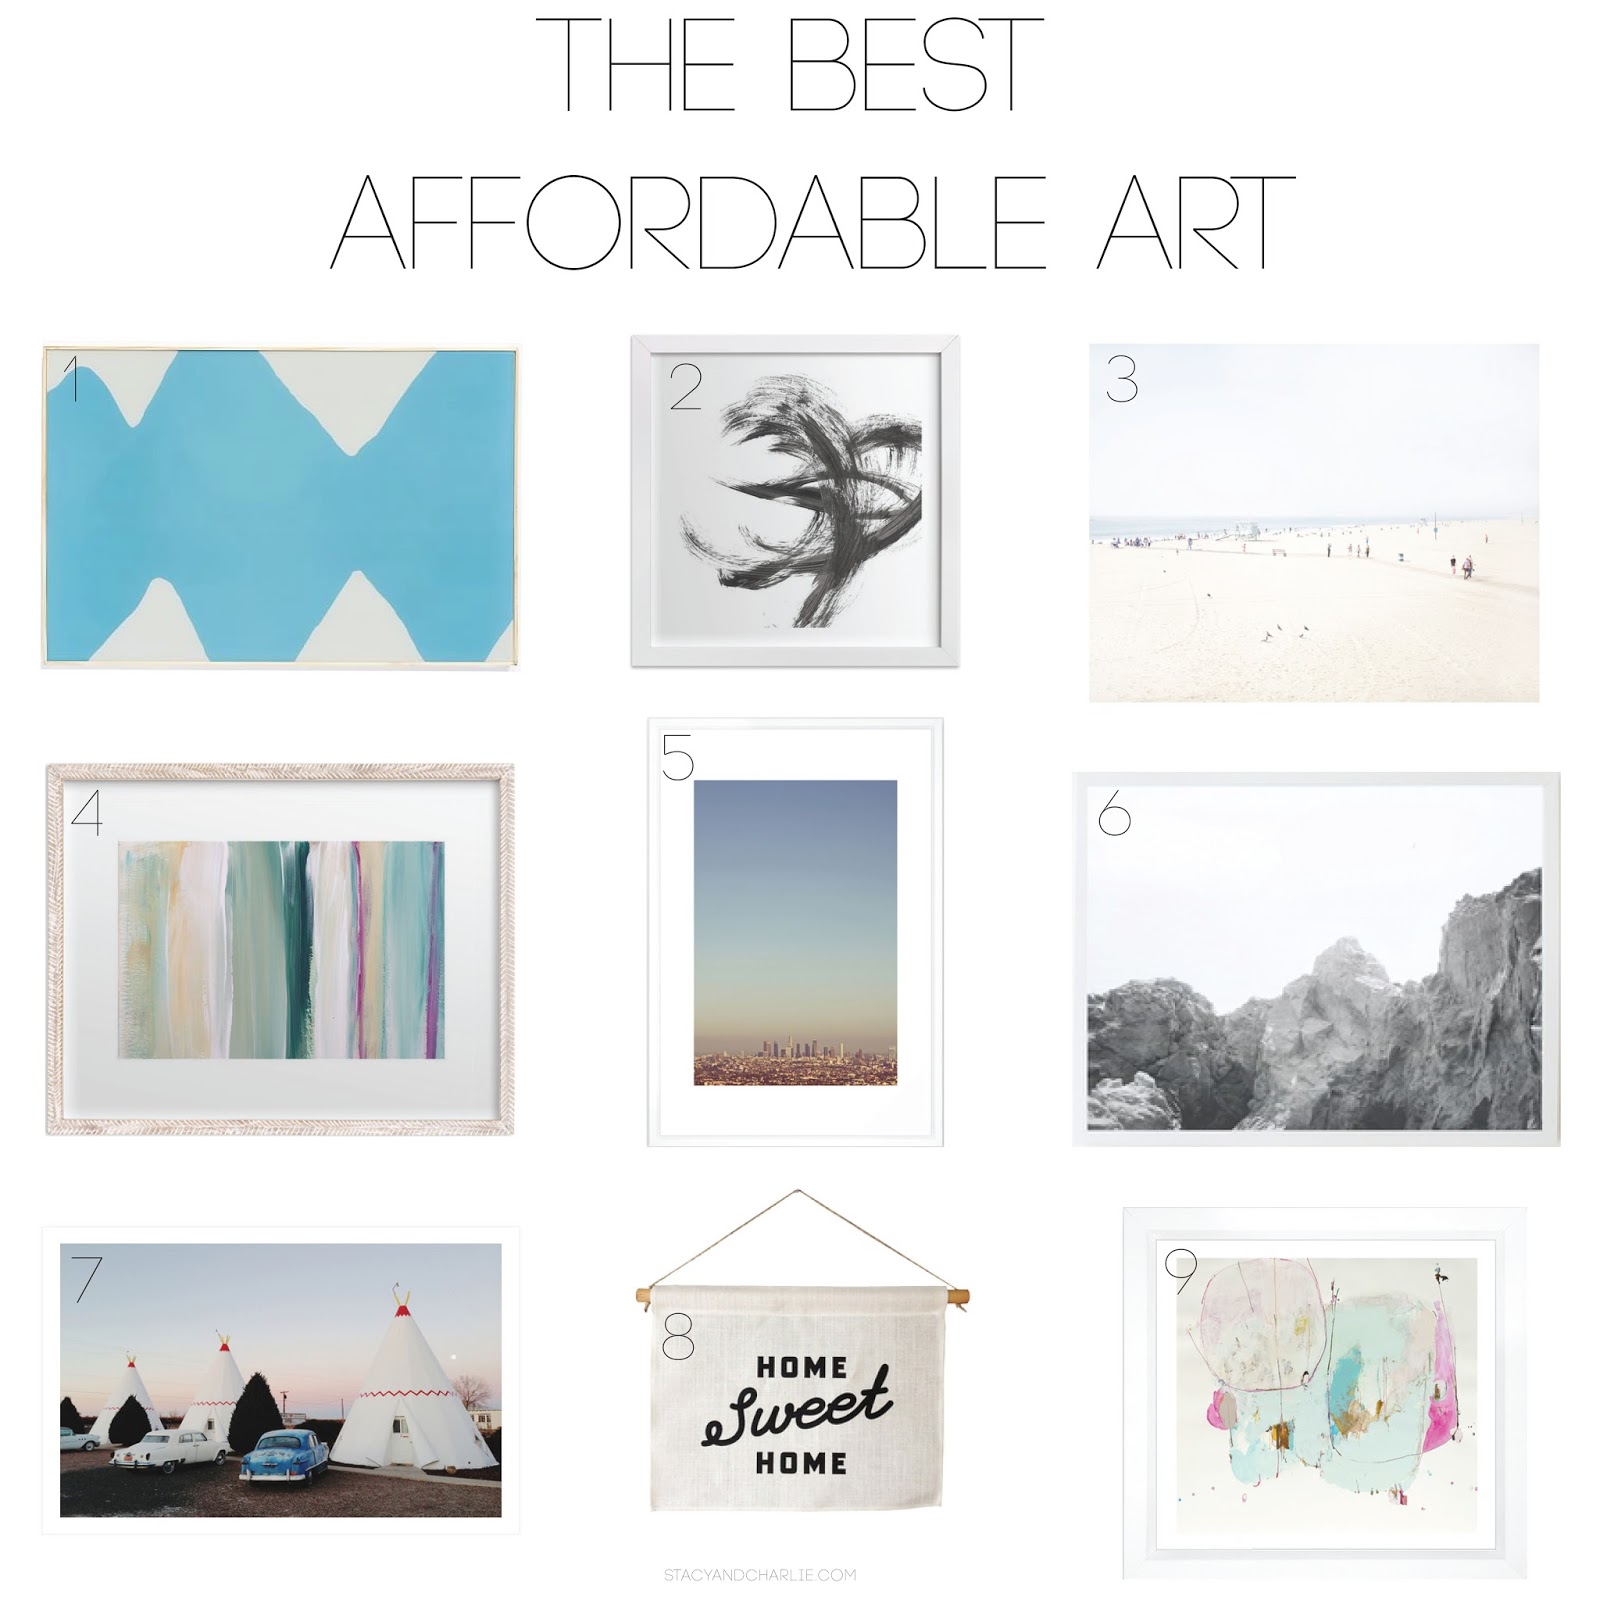 Stacy + Charlie: the best affordable art sources